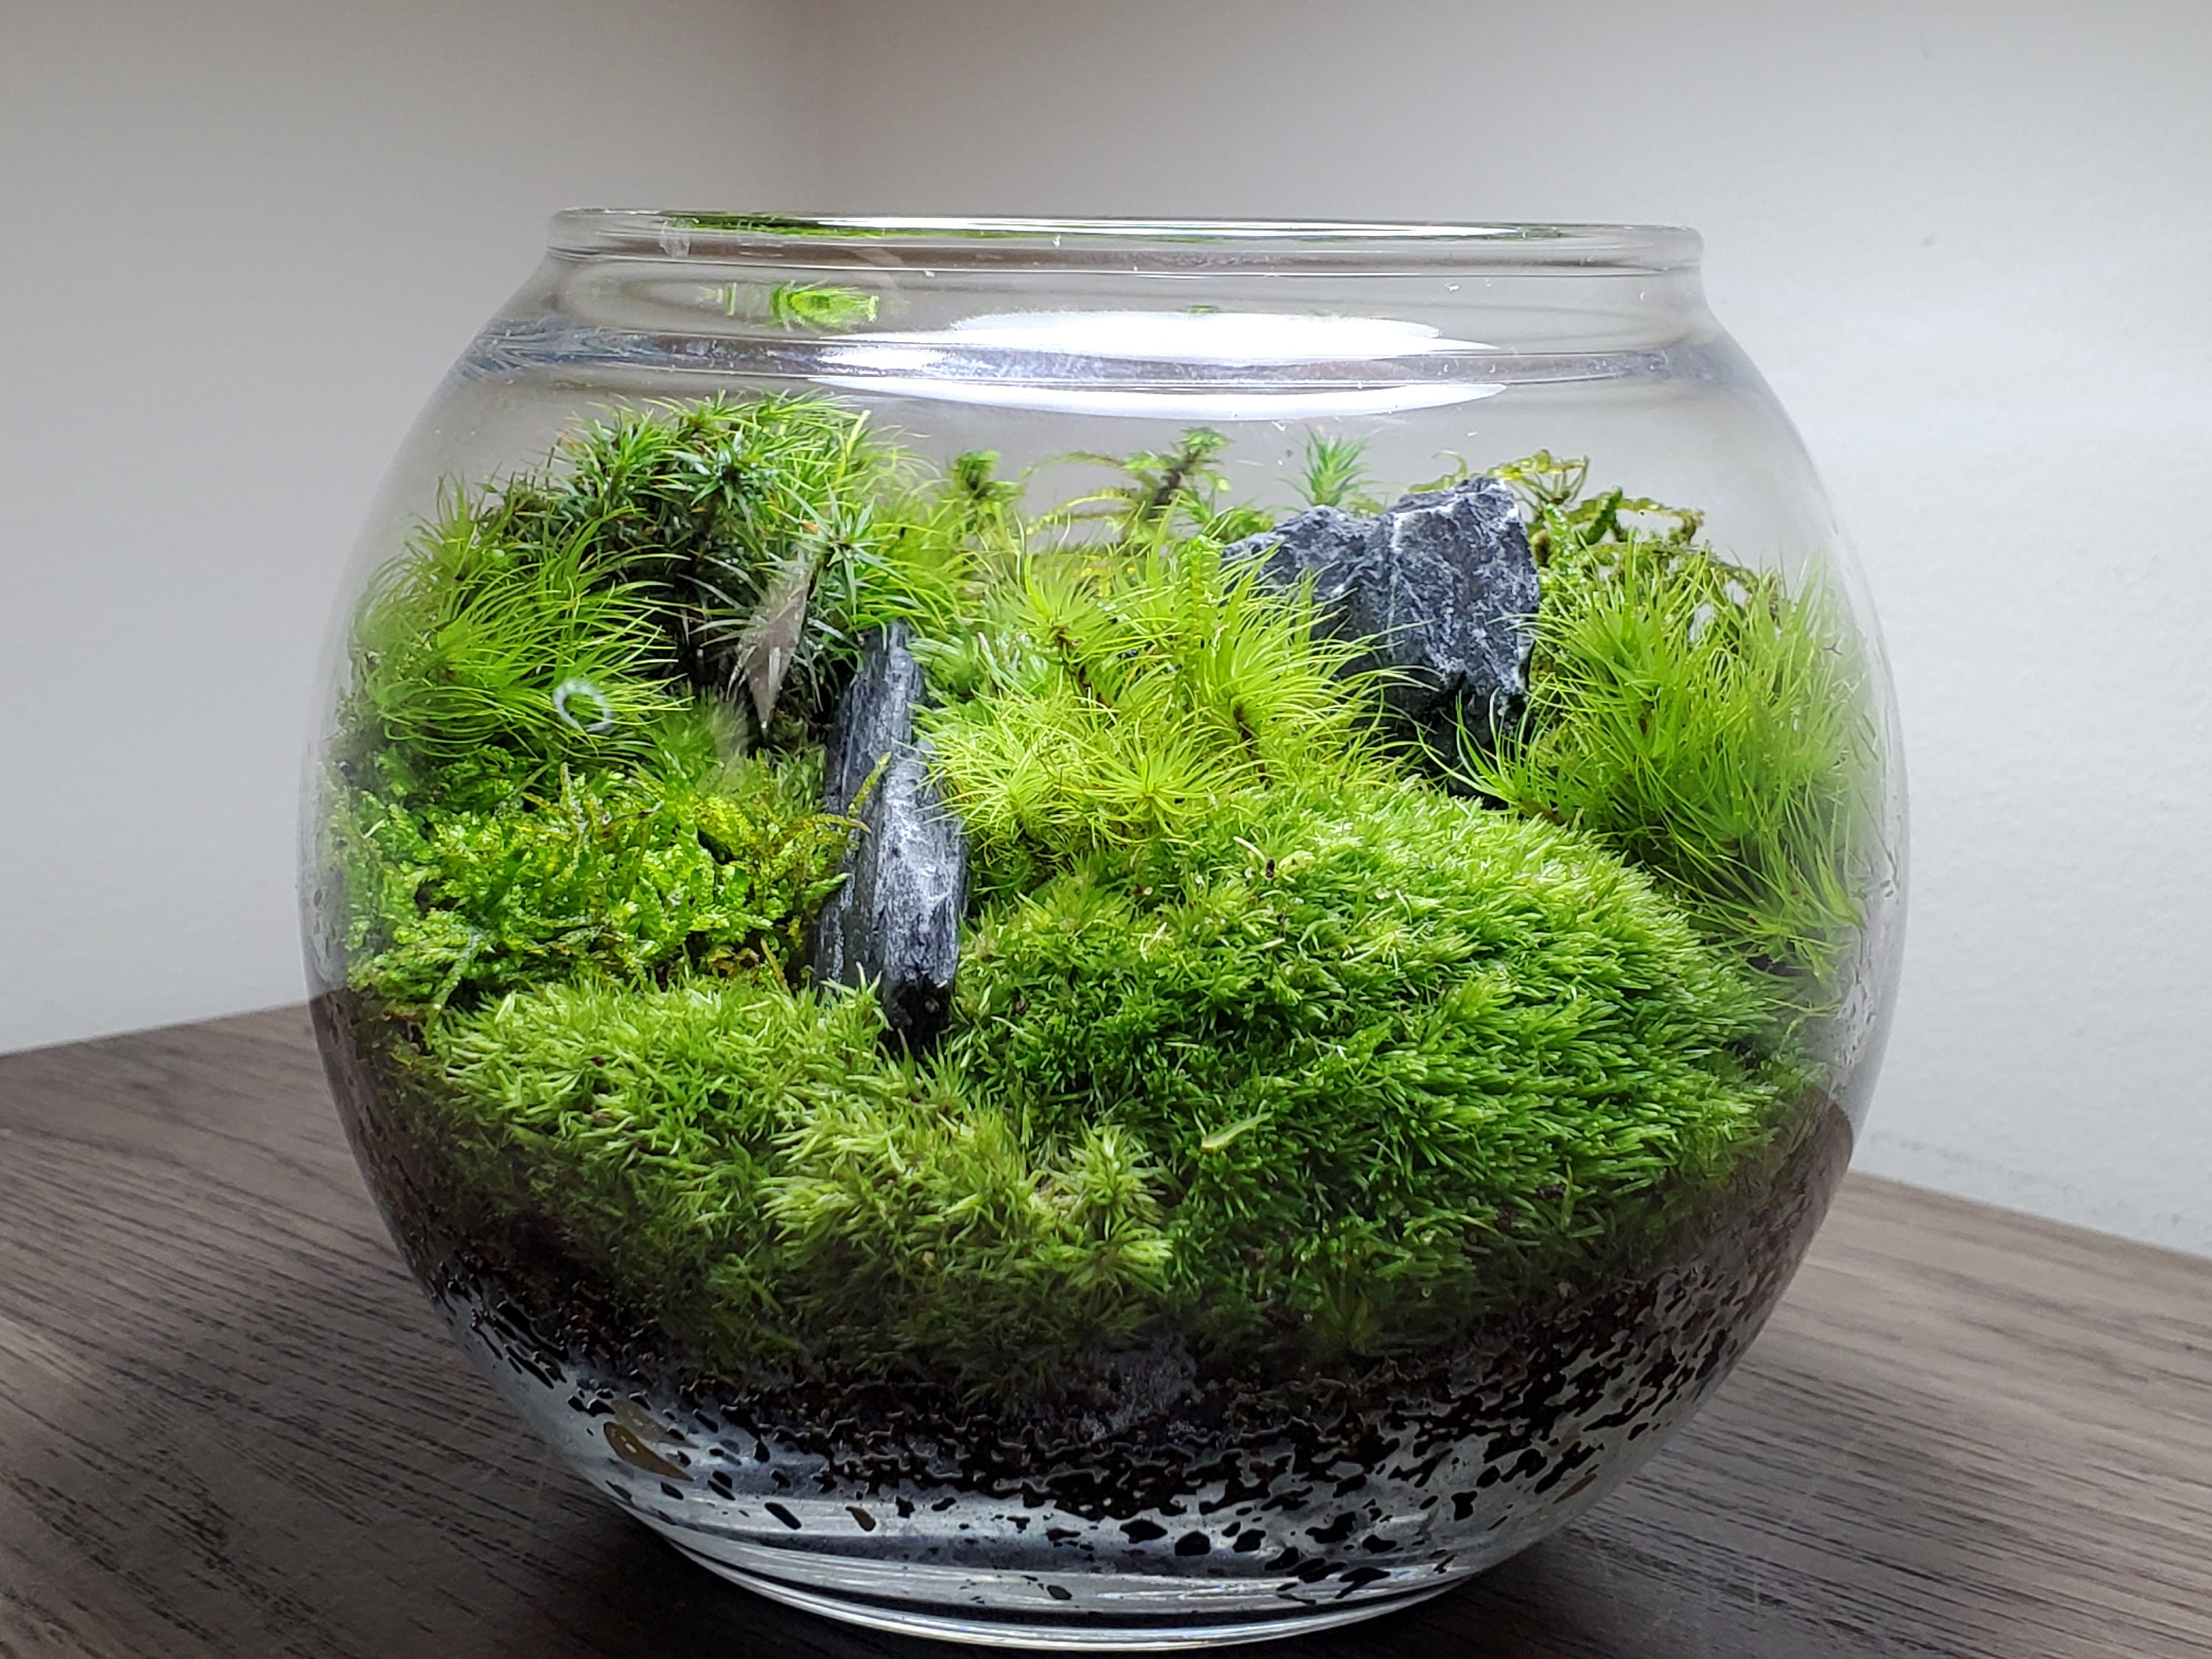 just got this super moss for my terrarium do you think it's safe